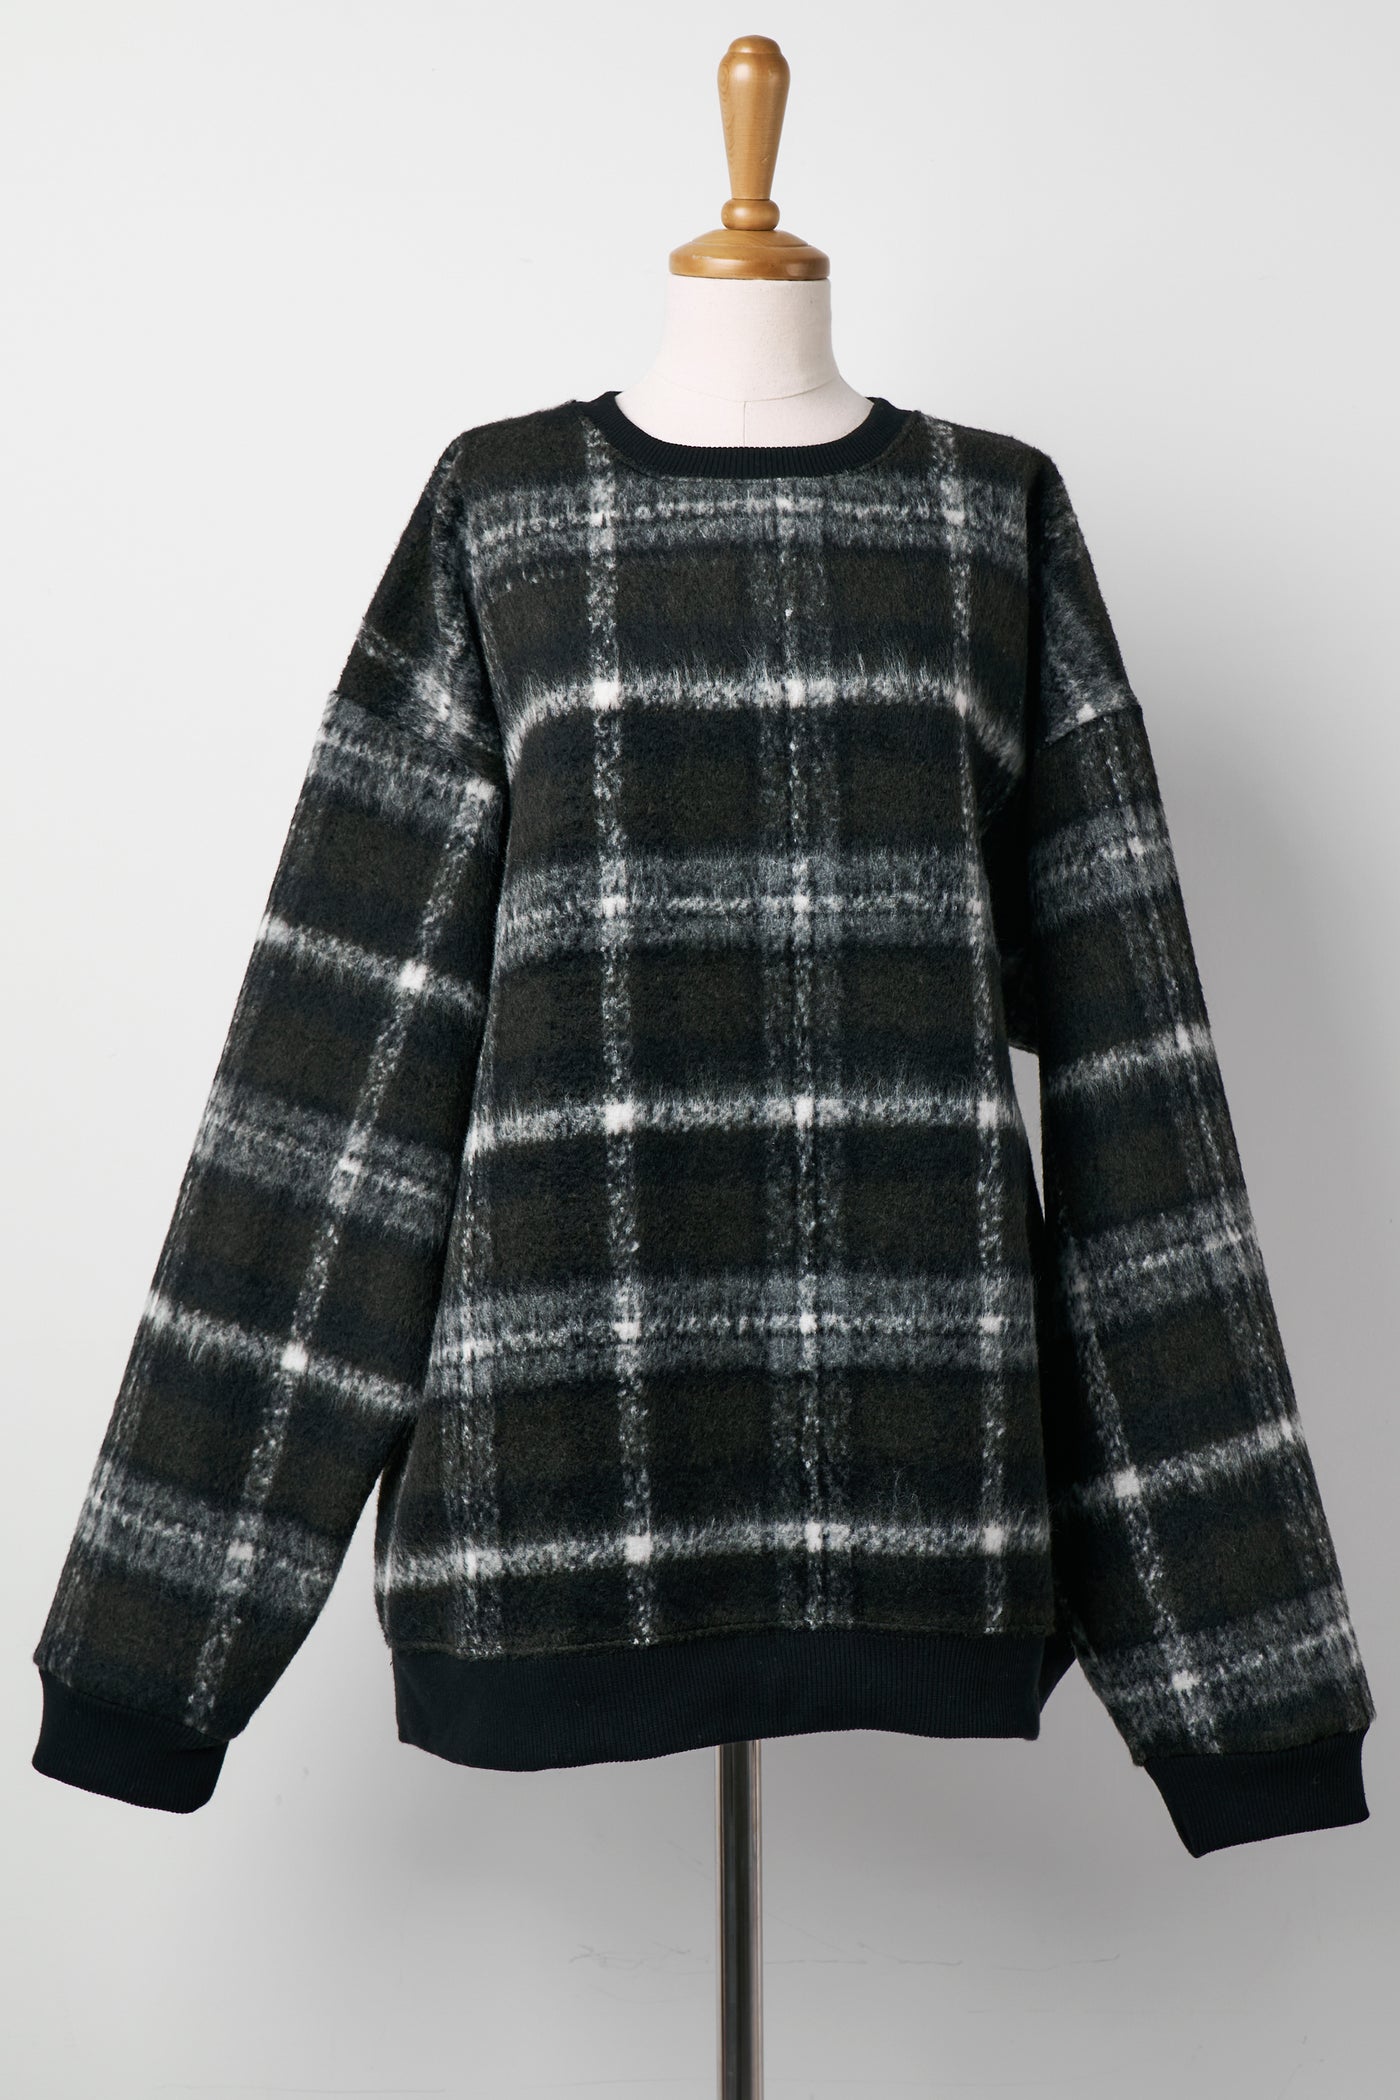 storets.com Willow Oversized Plaid Top